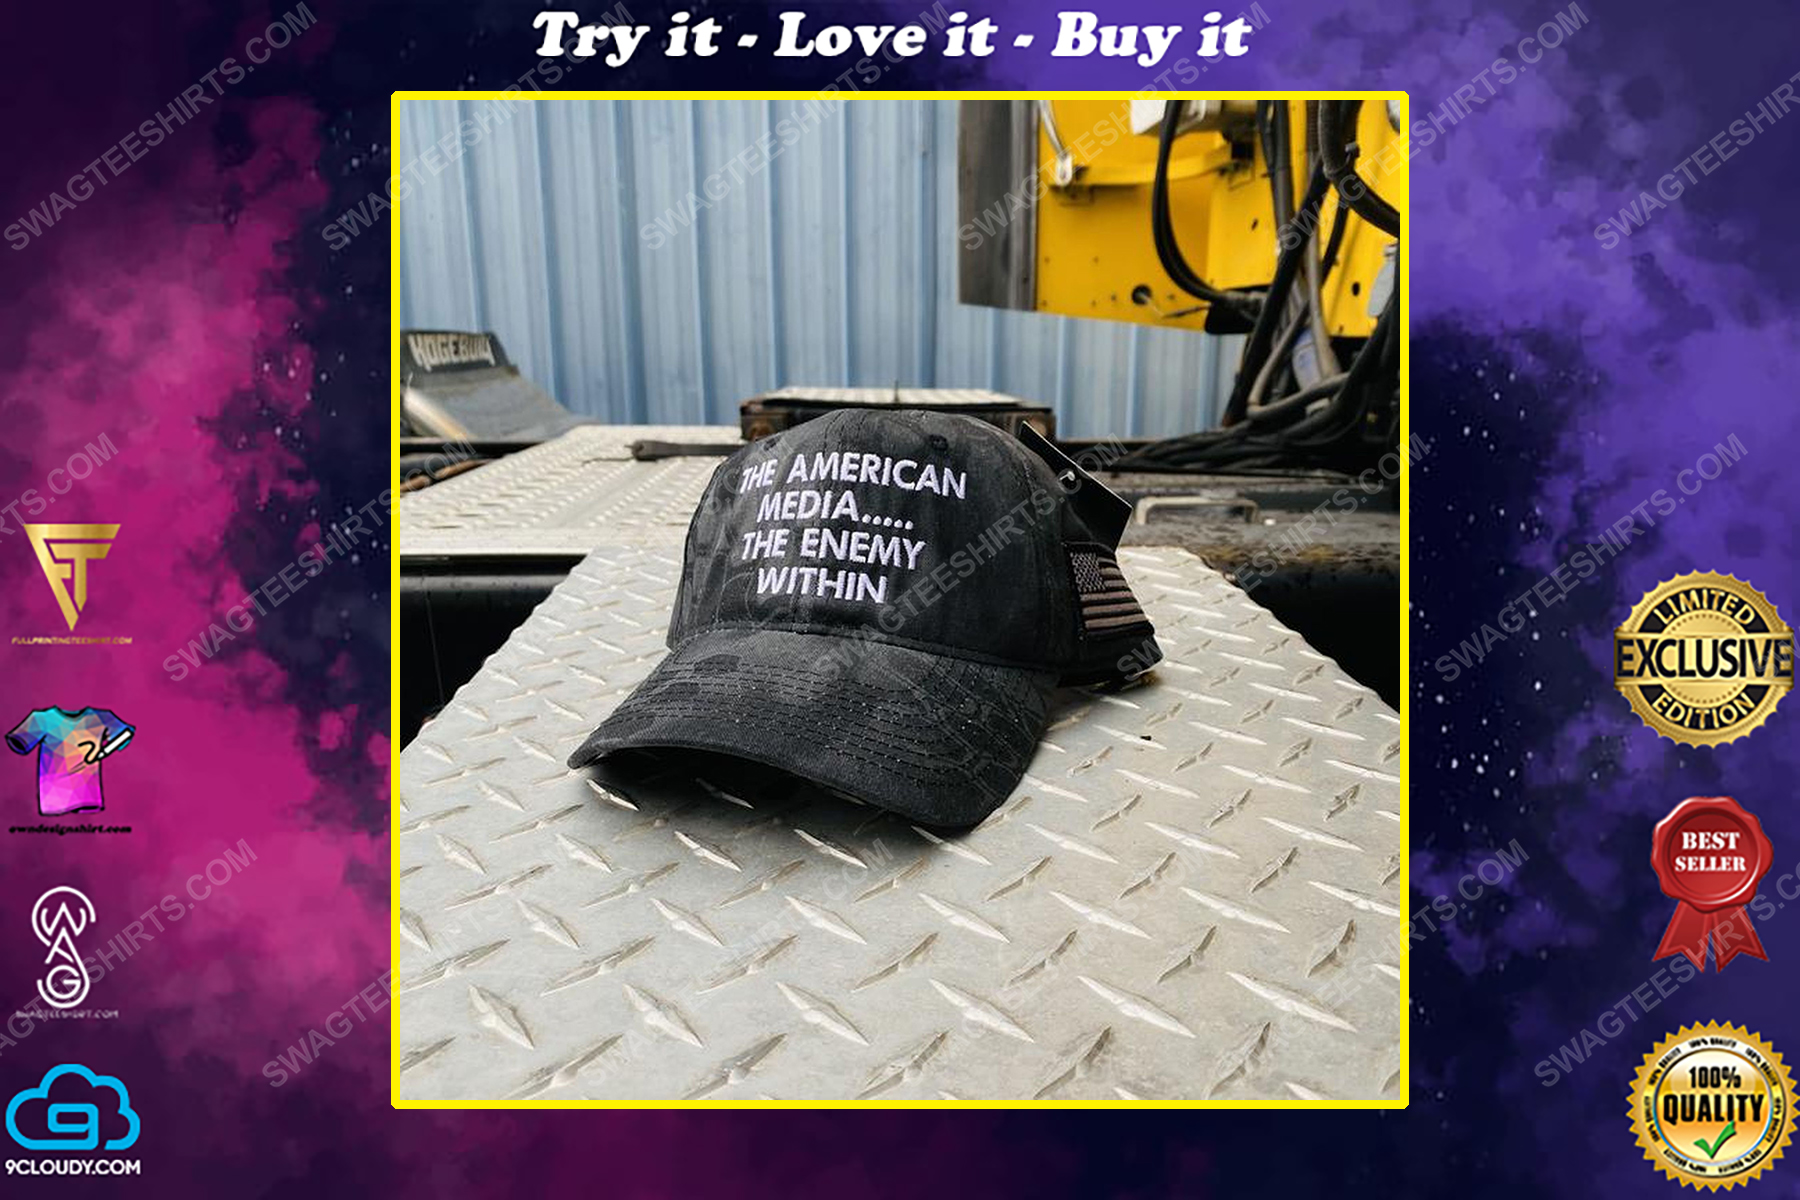 The american media the enemy within full print classic hat